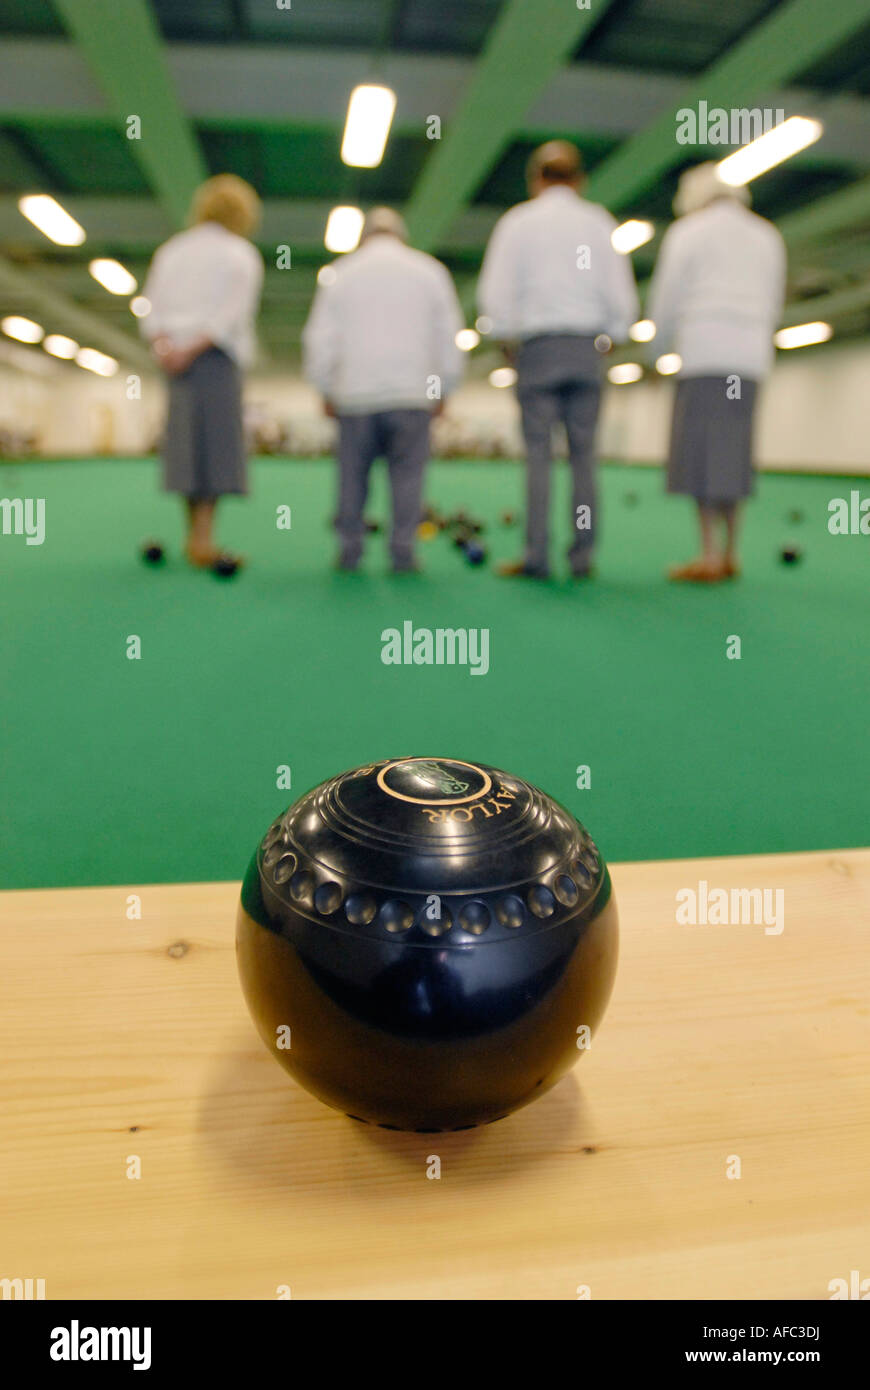 Bowling ball with bowlers competing at an indoor bowls green. Stock Photo